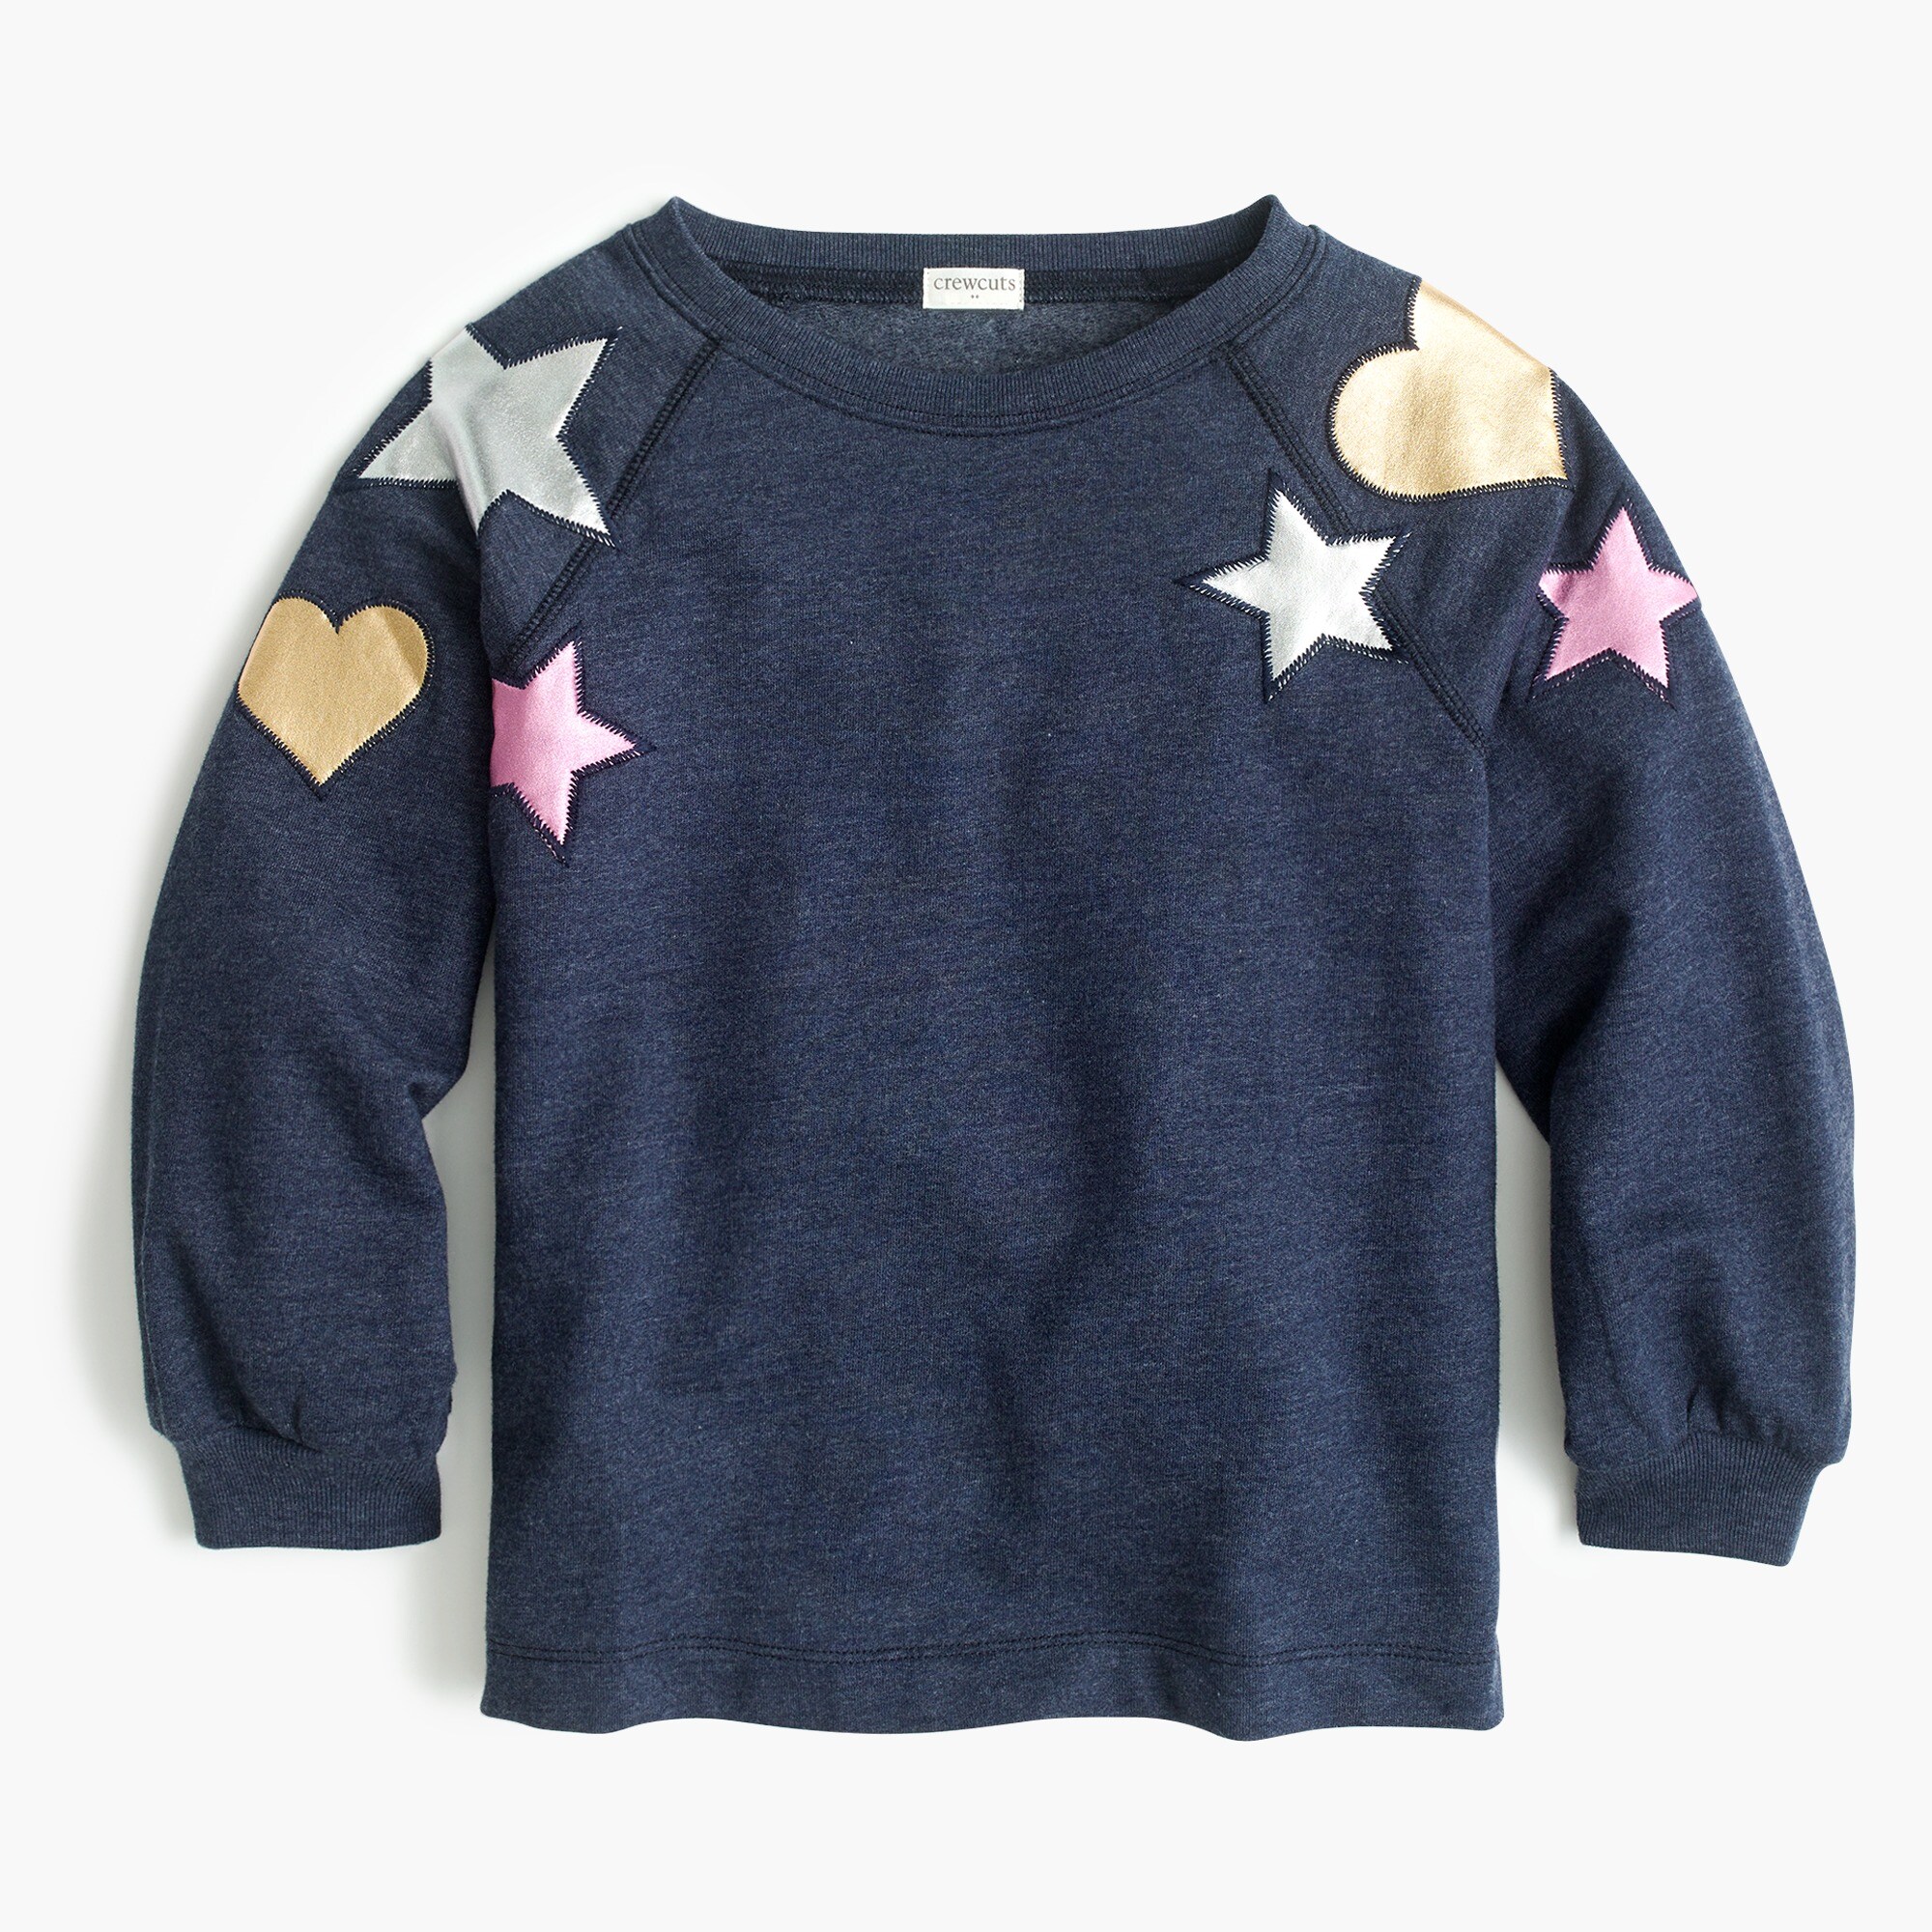 Girls’ sweatshirt with heart and star patches